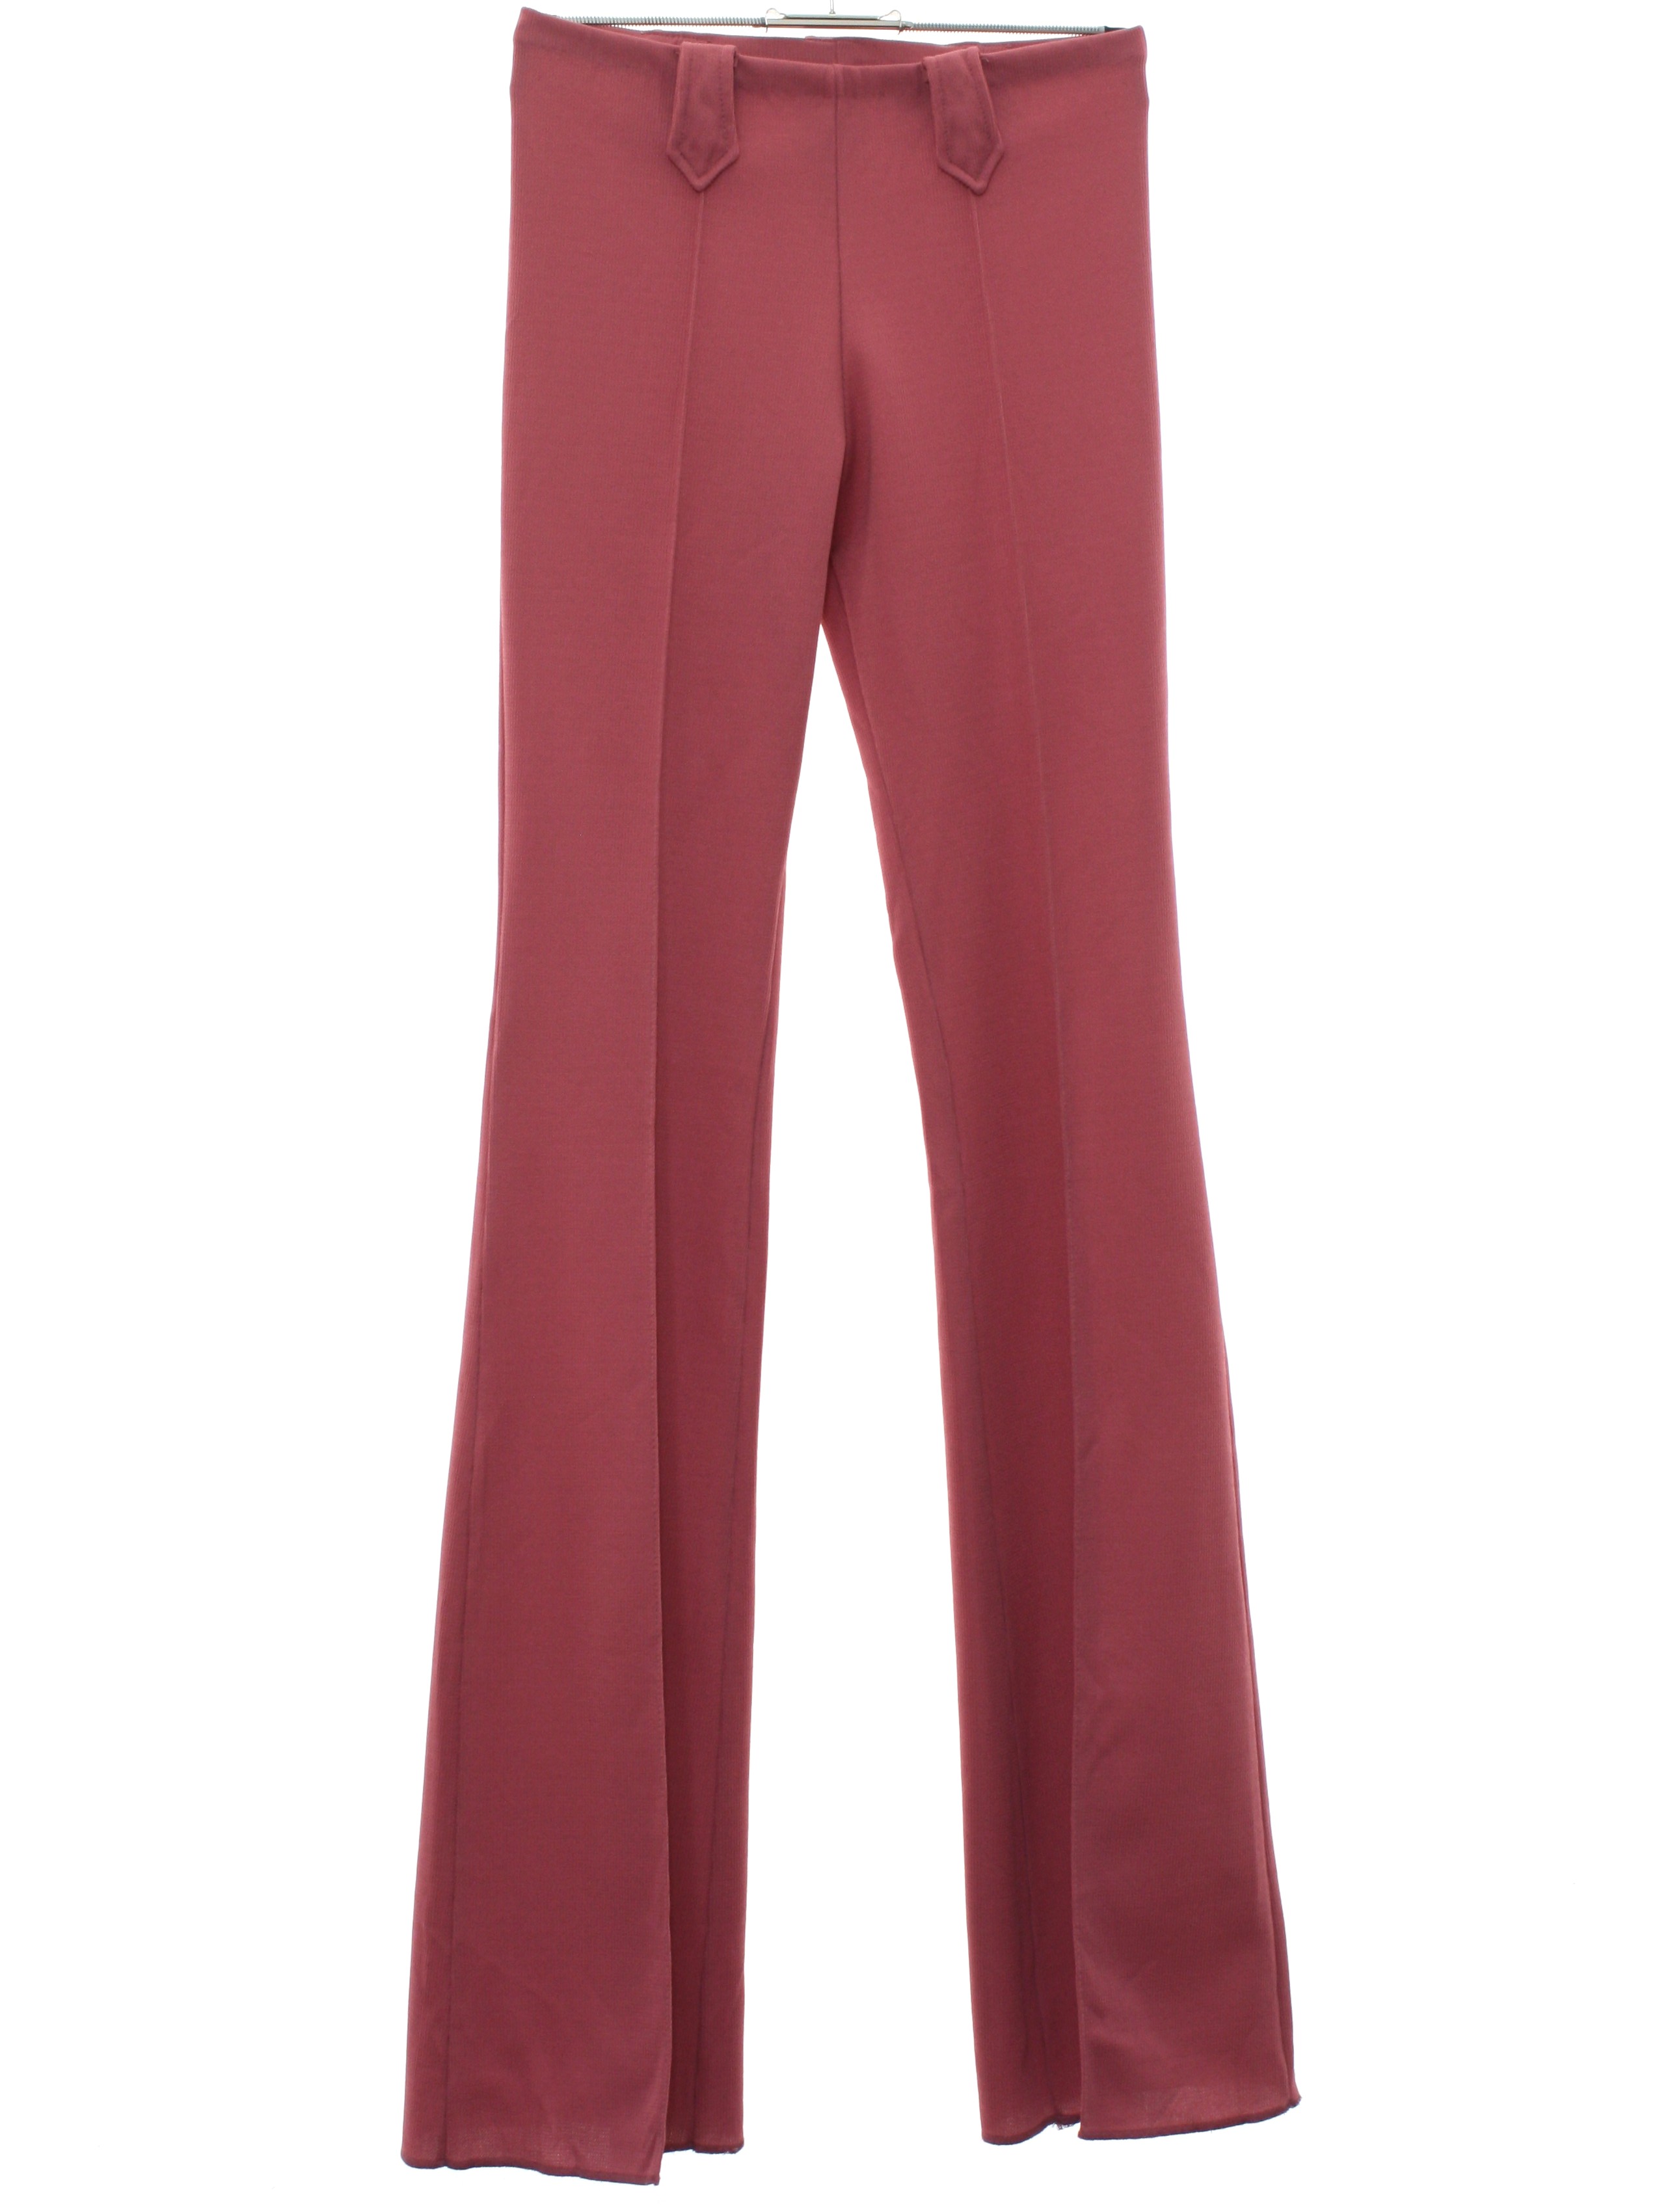 Seventies Flared Pants / Flares: 70s -Unreadable Label (looks like ...